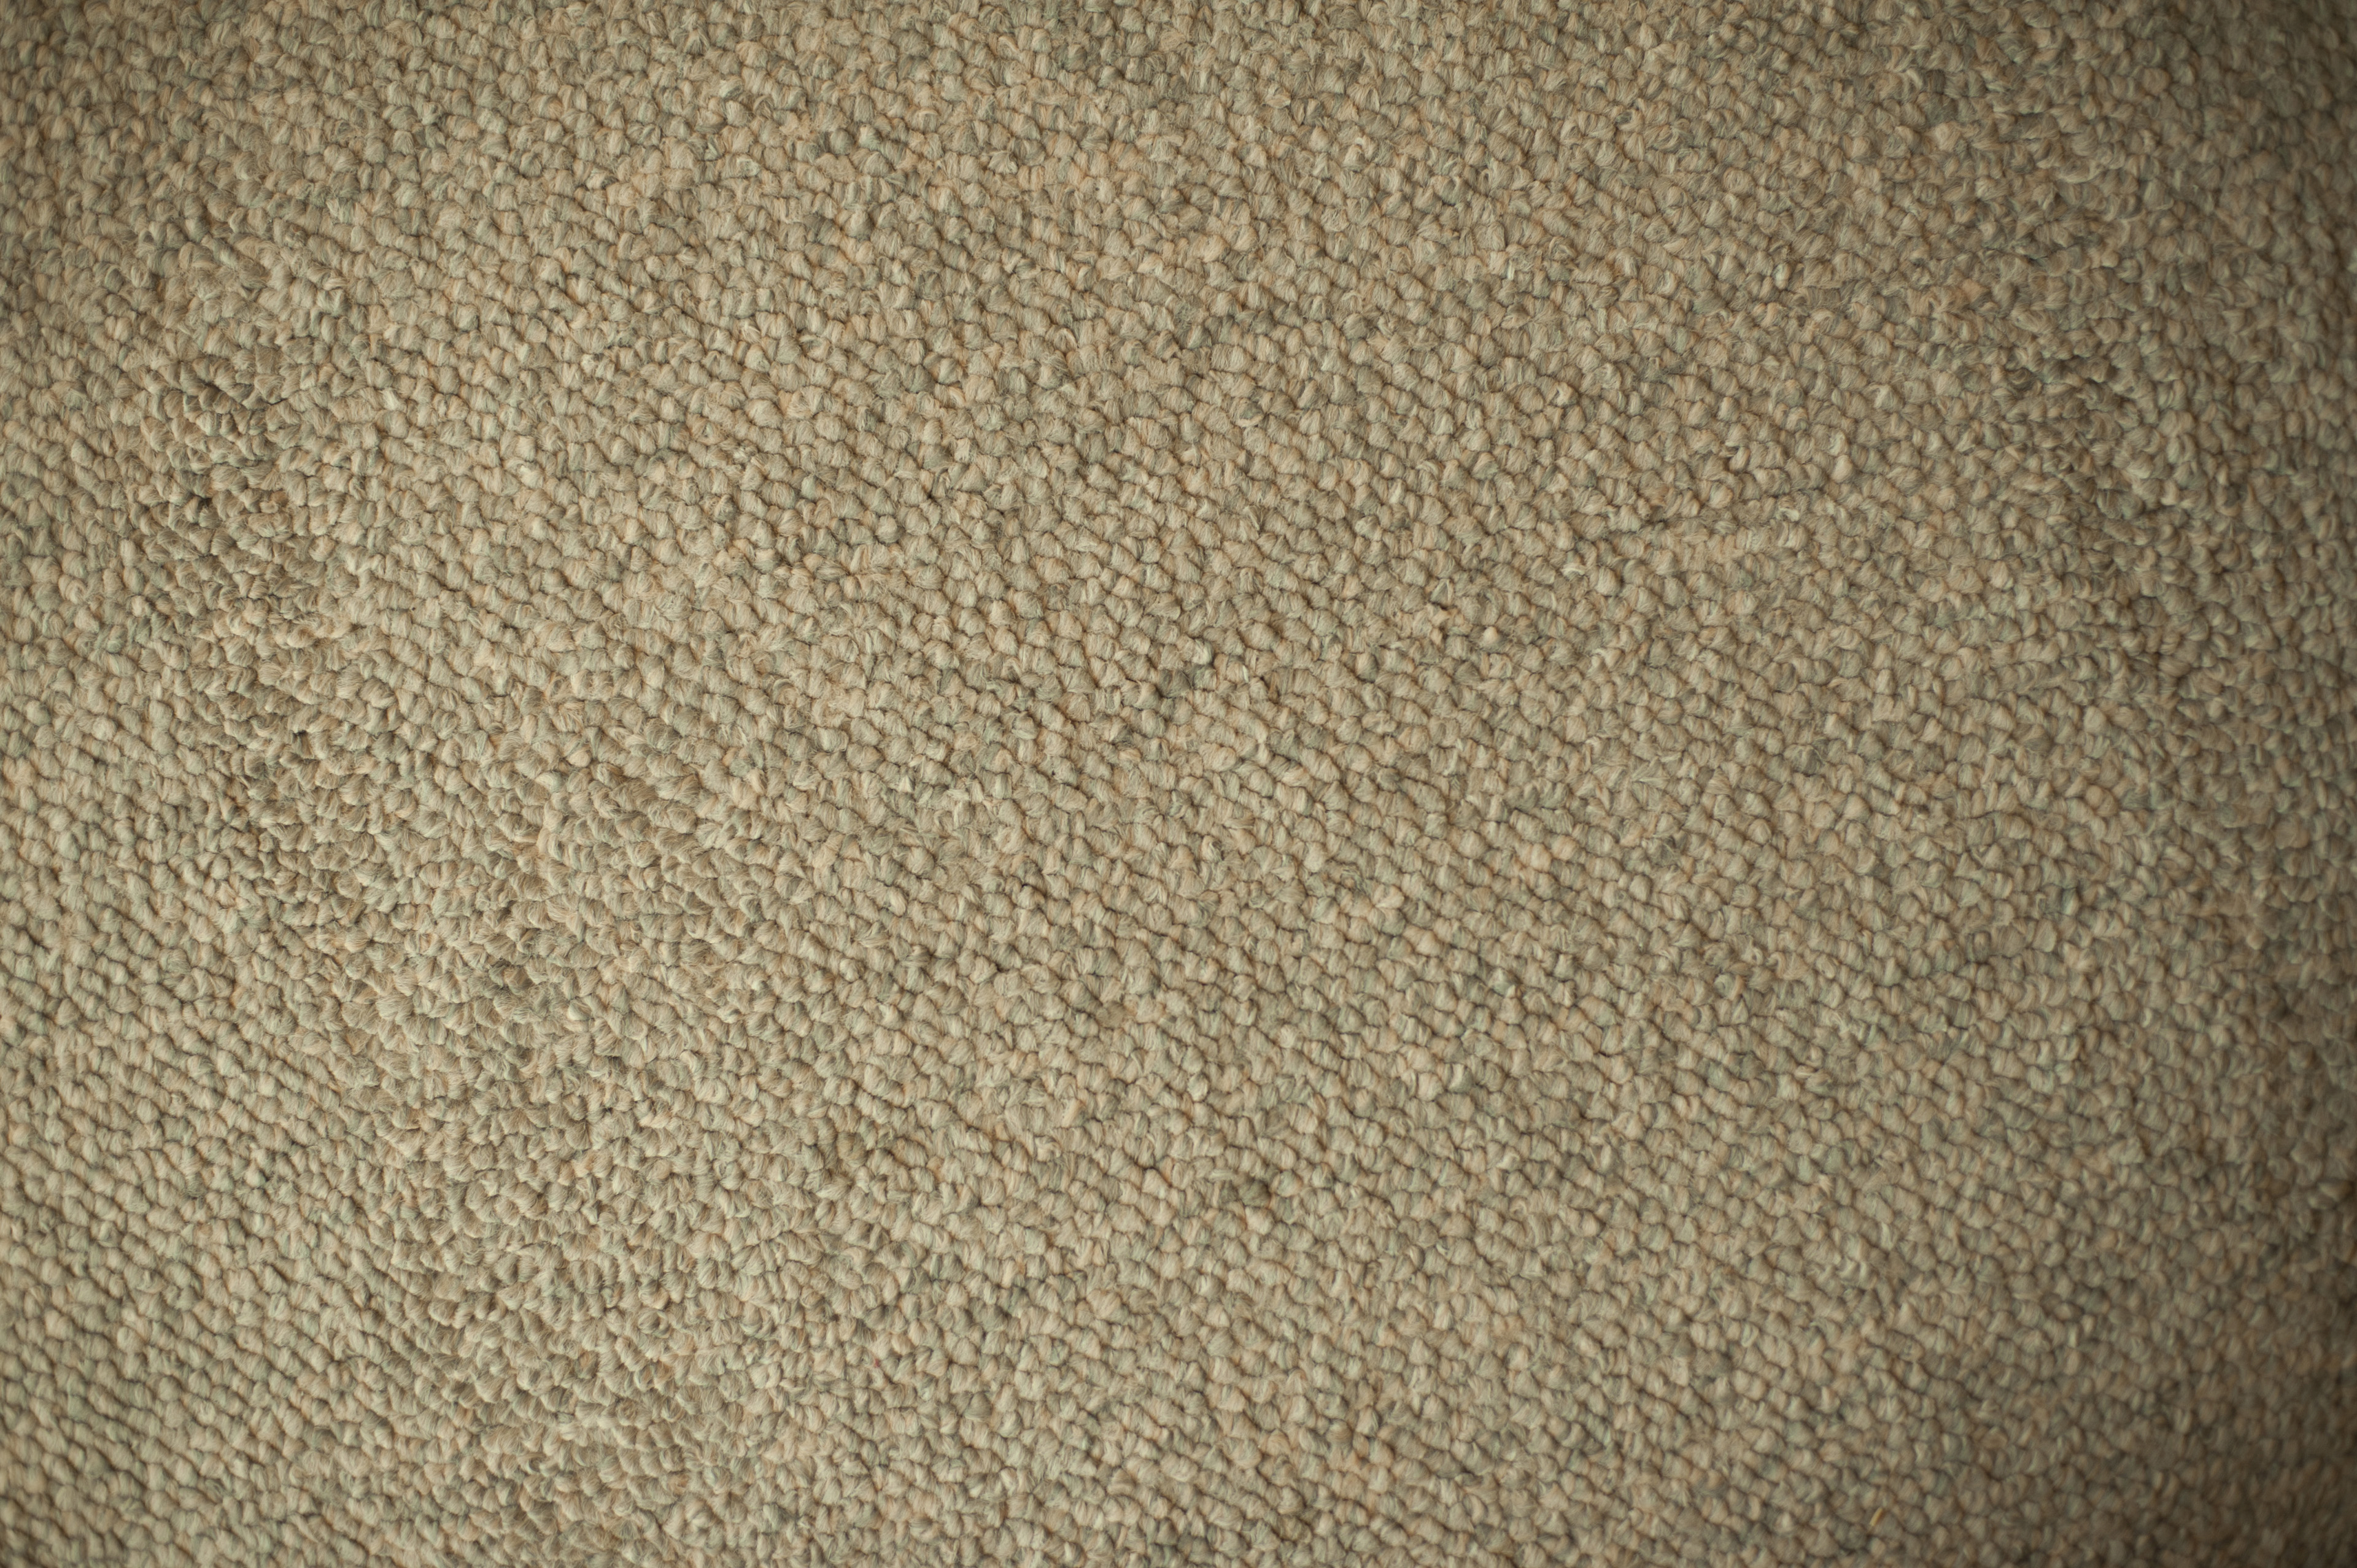 Free image of details of textured beige carpet for backgrounds